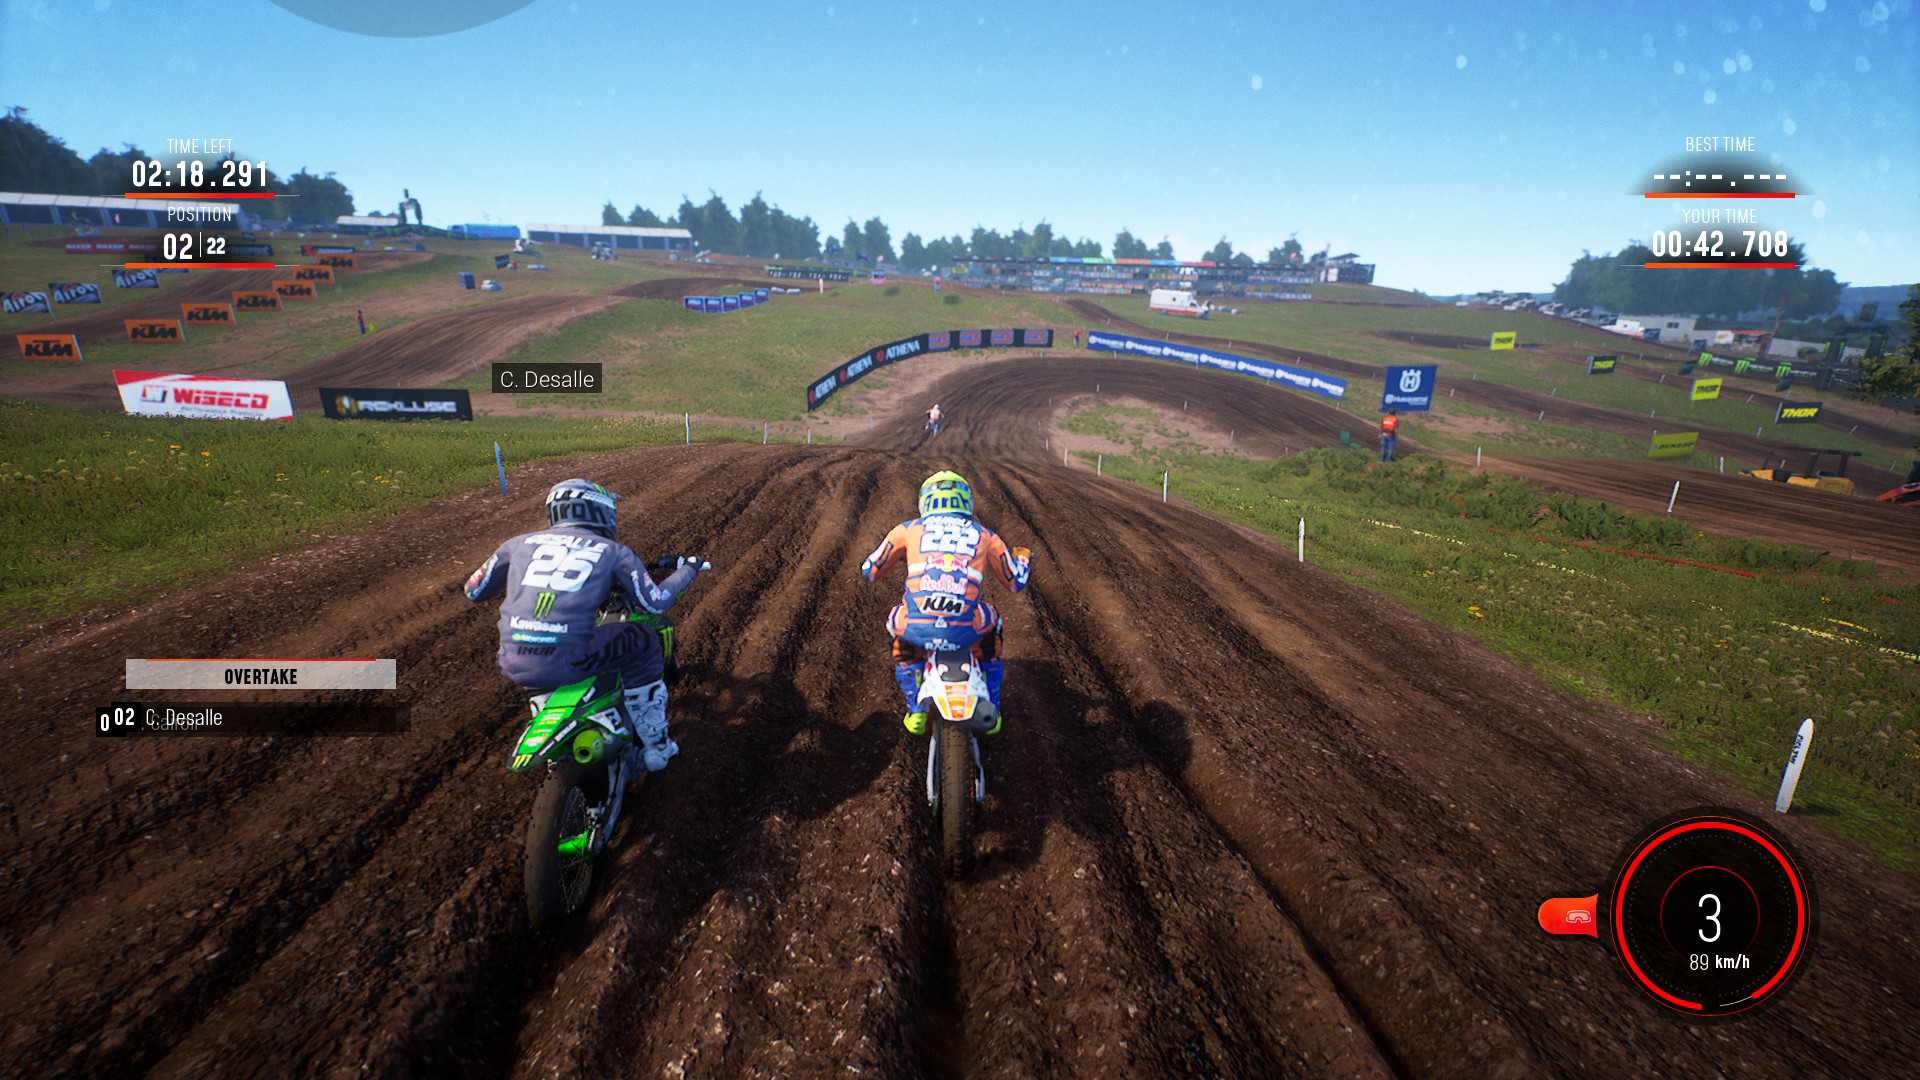 Save 85% on MXGP 2019 - The Official Motocross Videogame on Steam